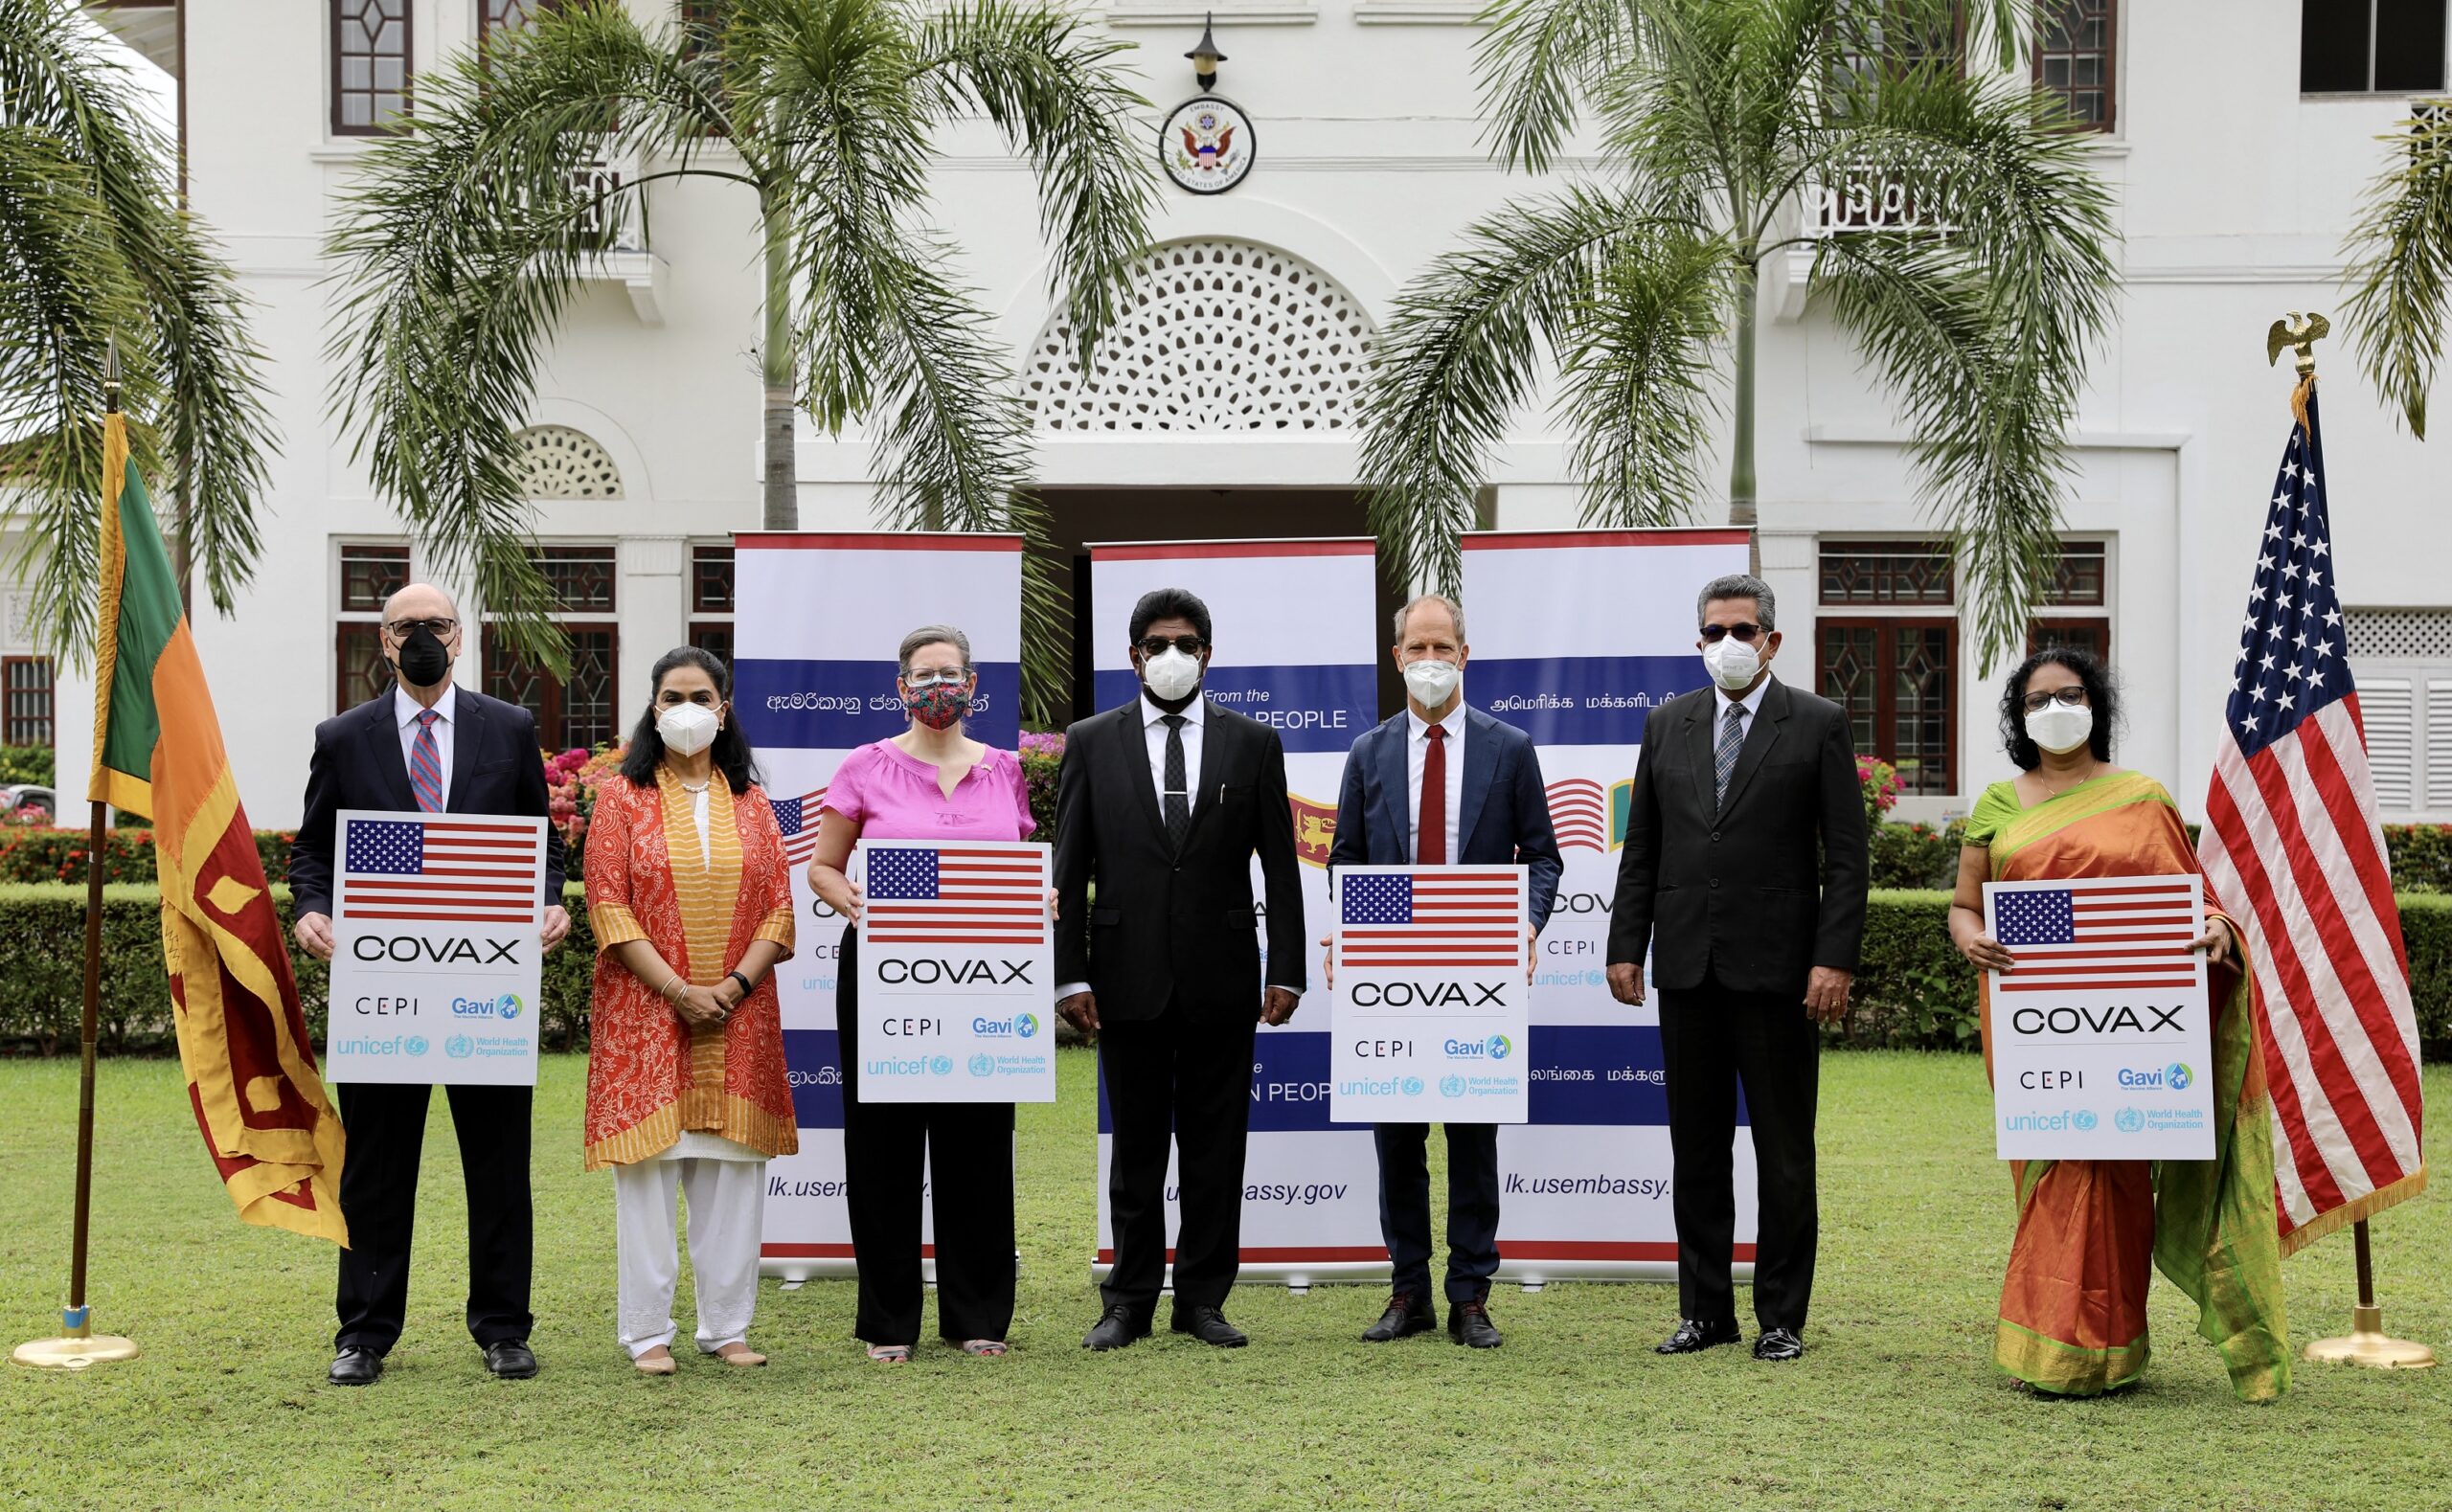 The US donates over 100,000 doses of the Pfizer-BioNTech COVID-19 vaccine to Sri Lanka